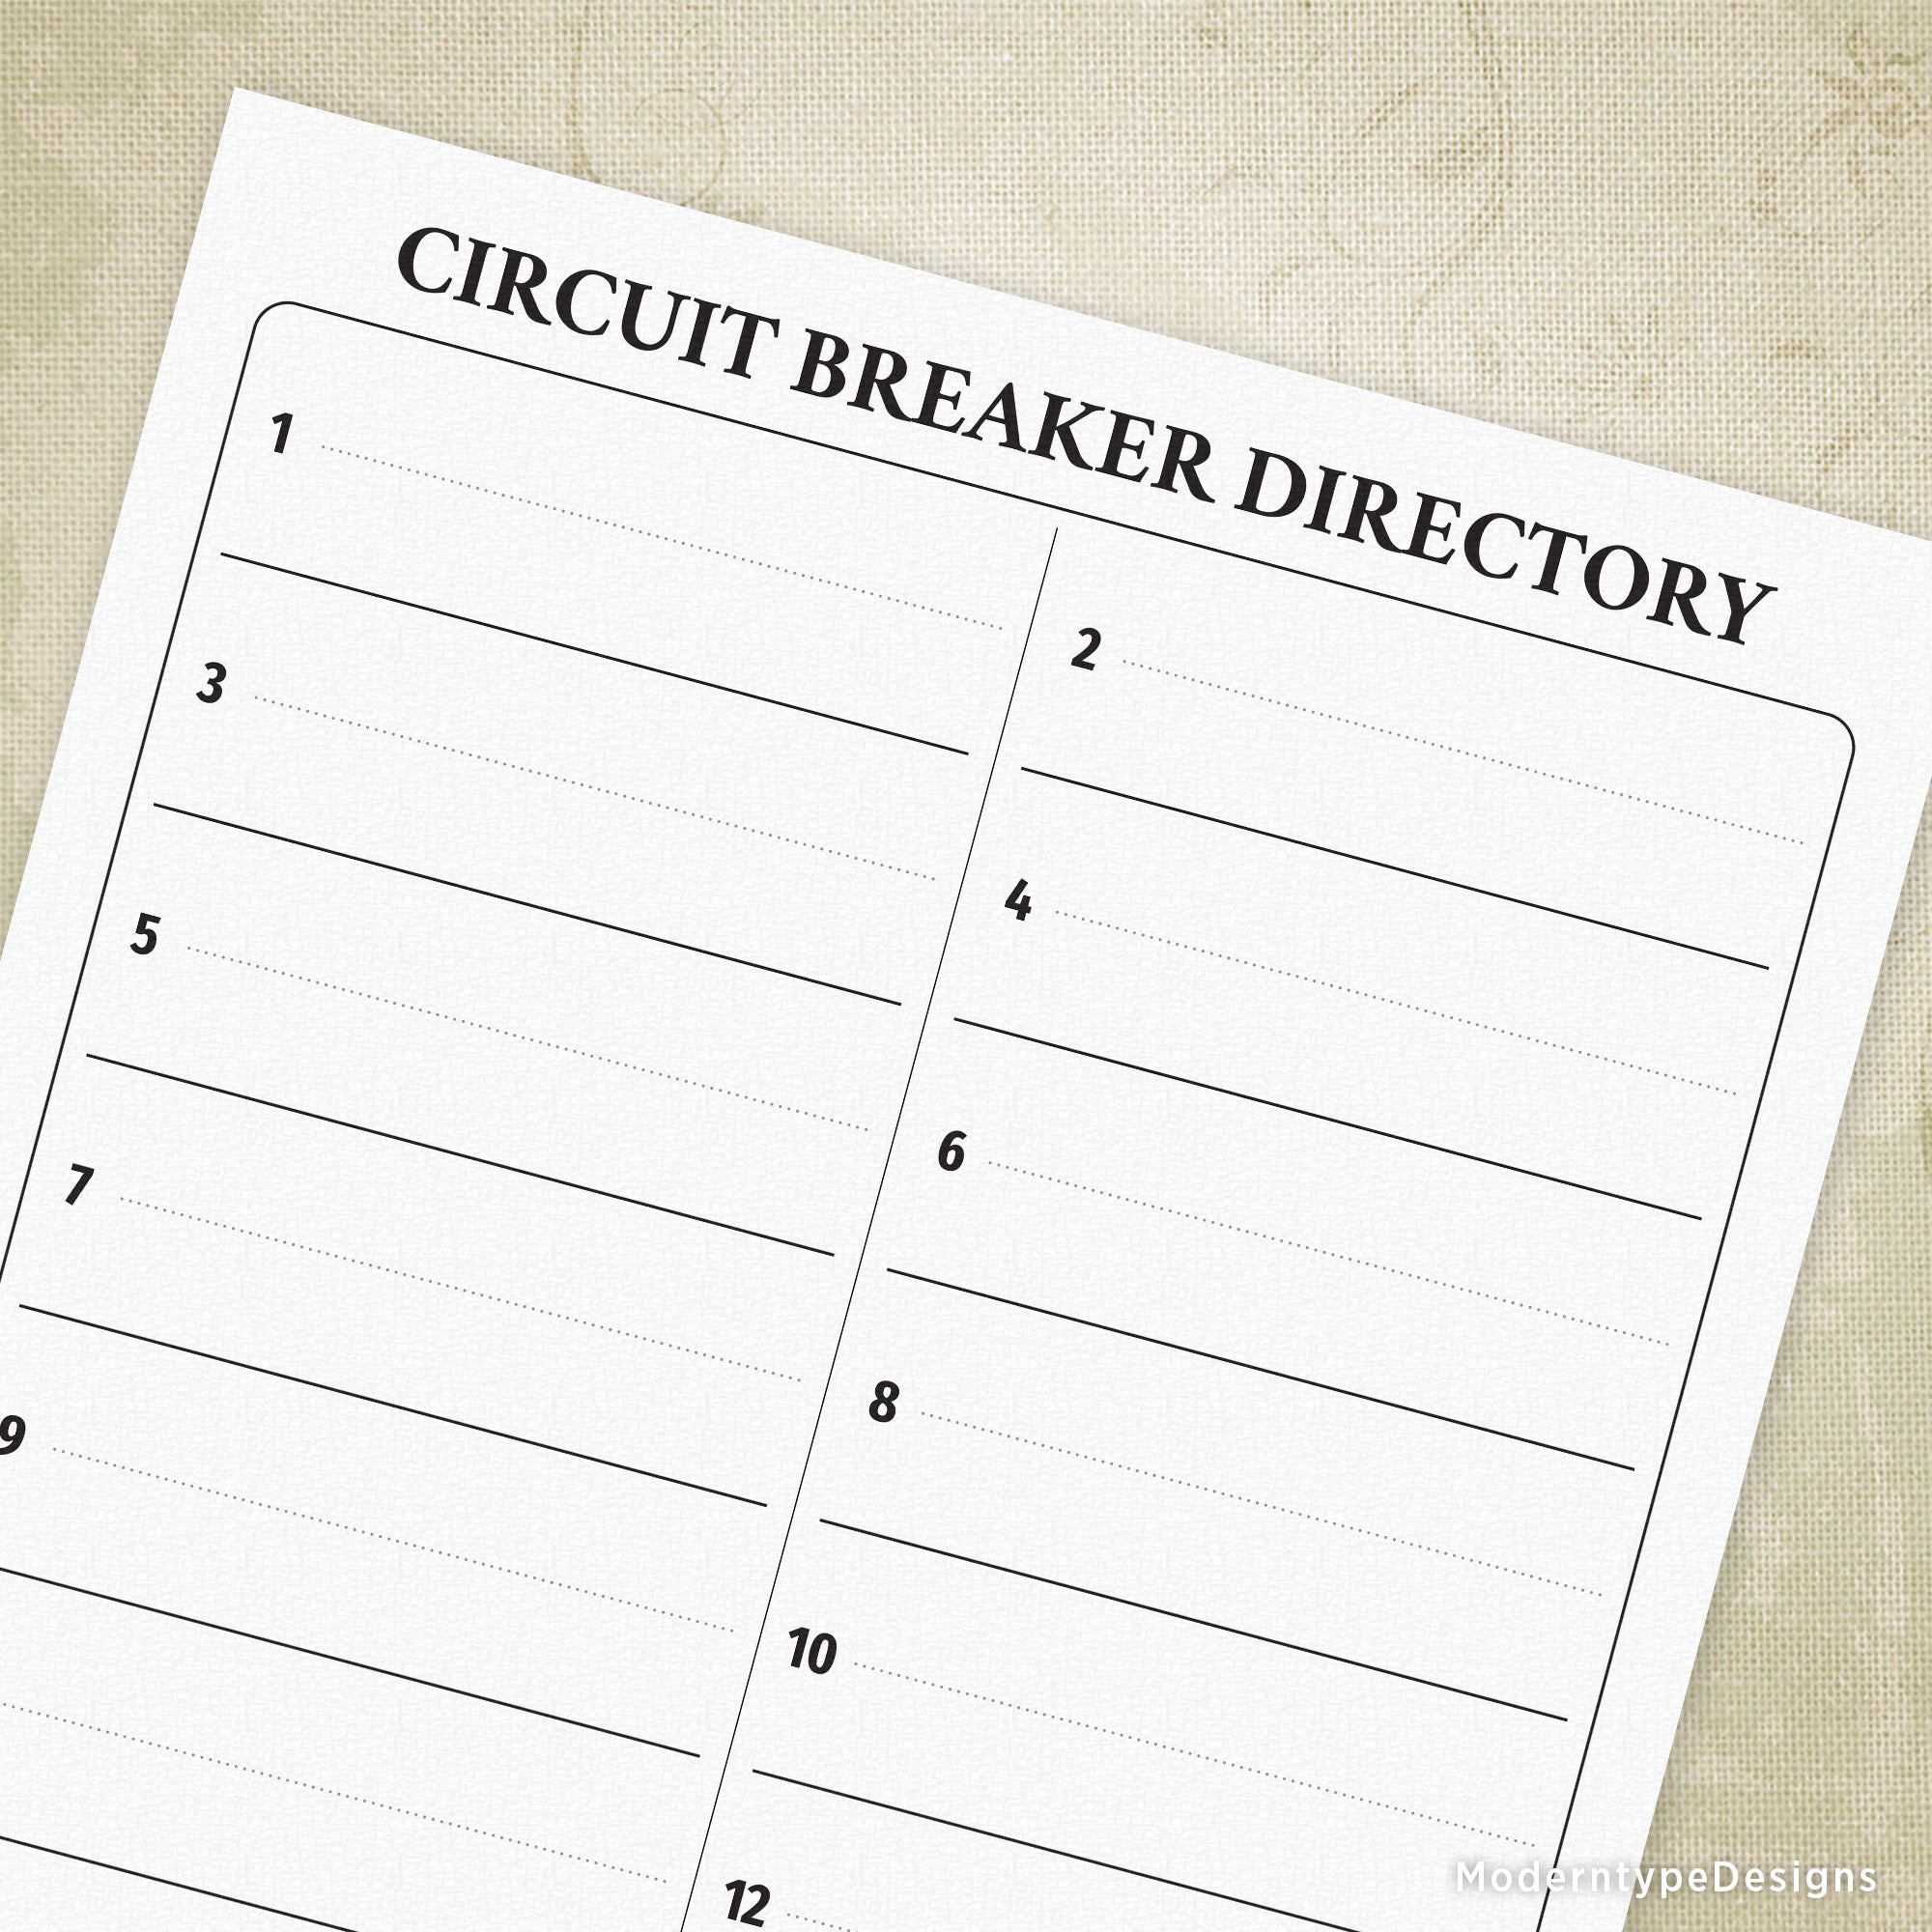 breaker-directory-printable-with-16-circuits